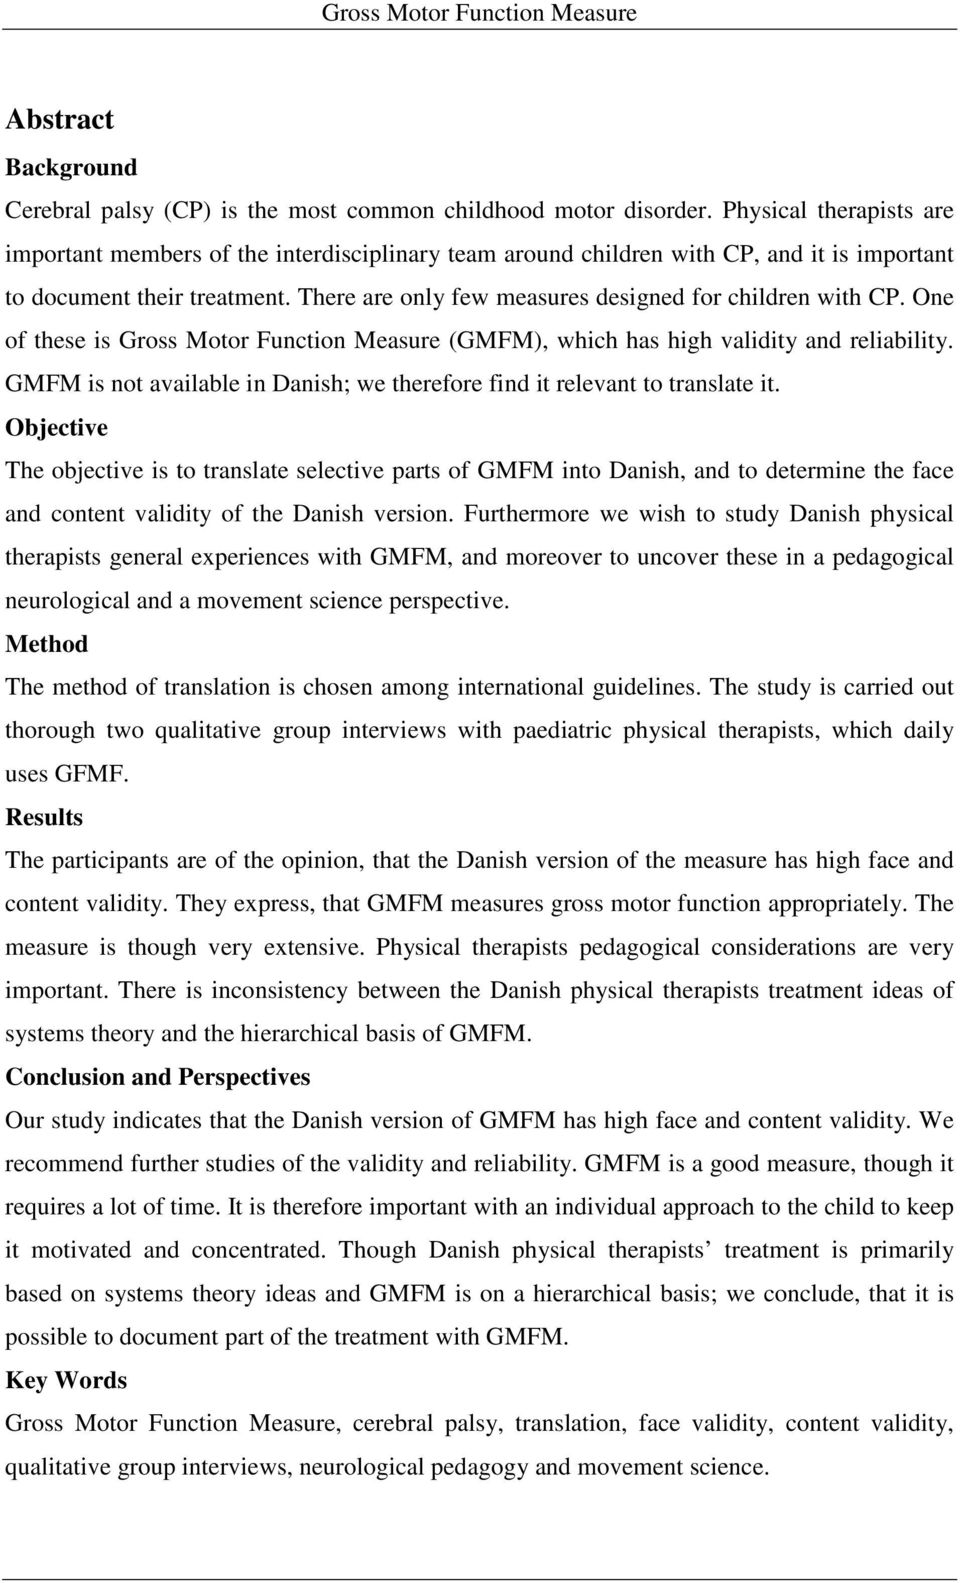 There are only few measures designed for children with CP. One of these is Gross Motor Function Measure (GMFM), which has high validity and reliability.